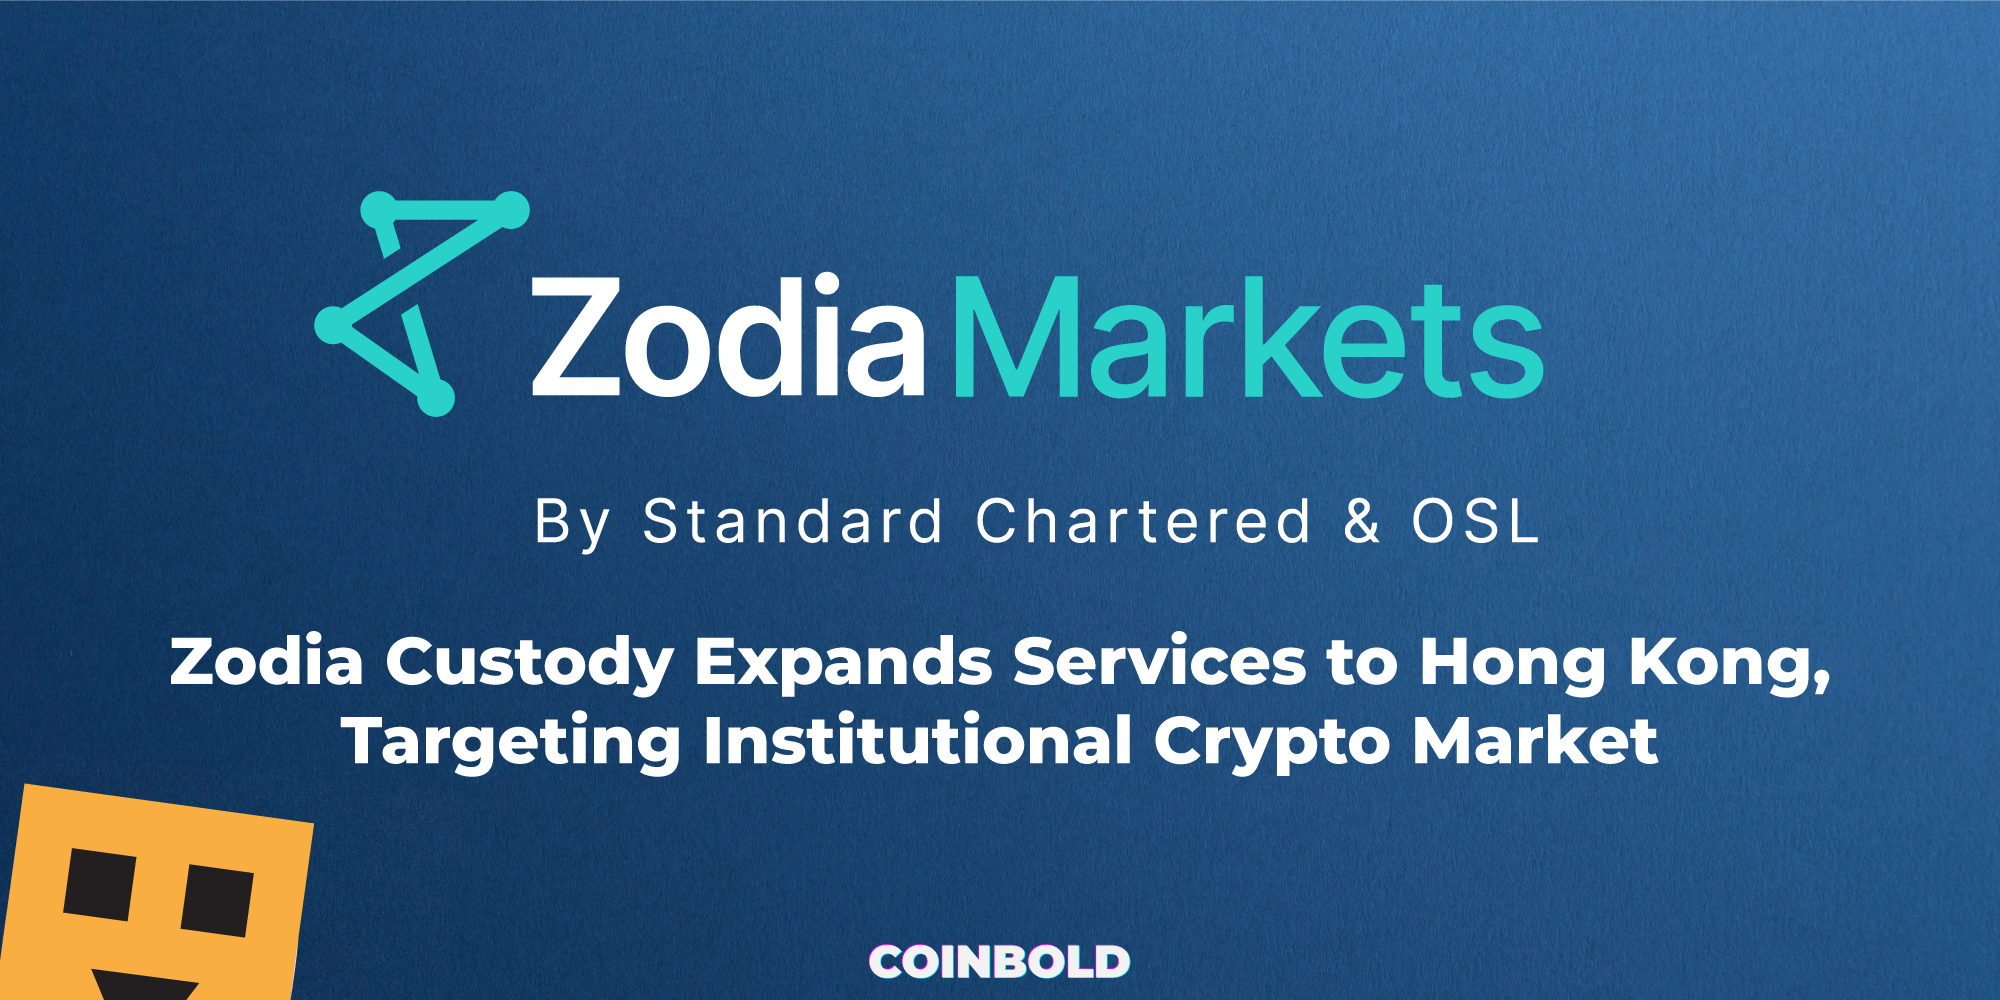 Zodia Custody Expands Services to Hong Kong, Targeting Institutional Crypto Market